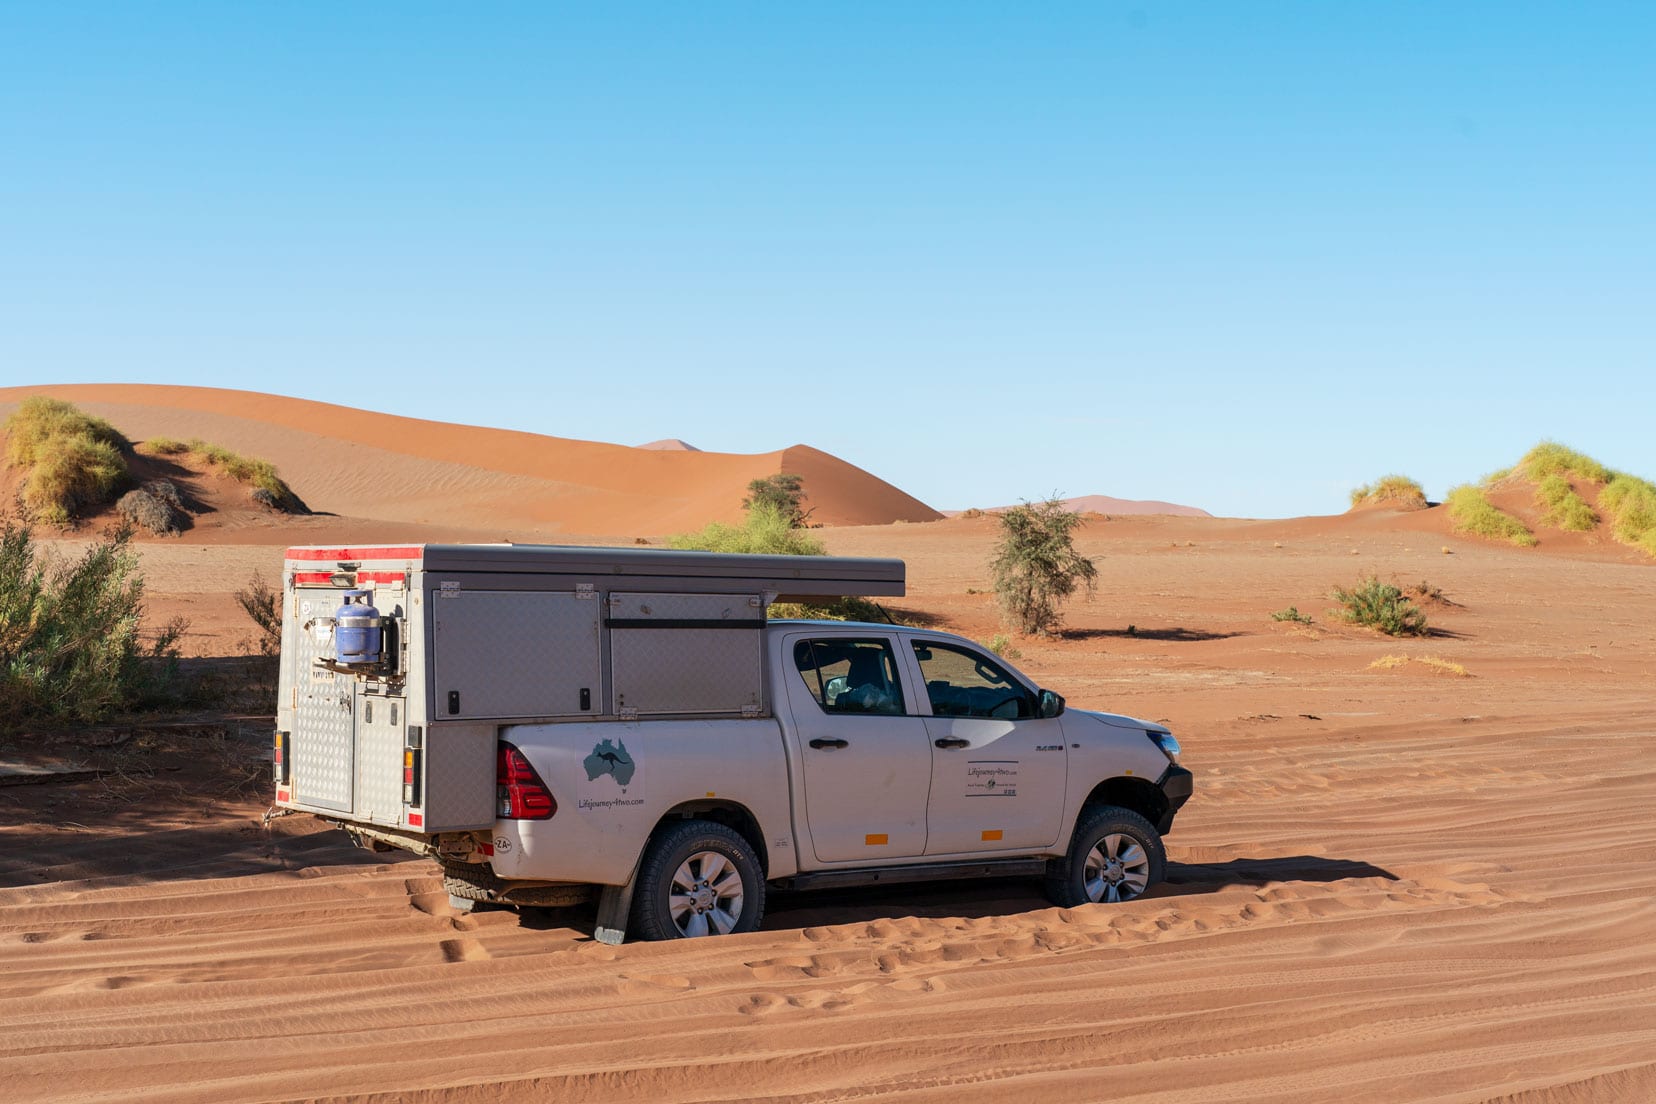 Our 4x4 hilux bogged in the sand on the way to deadvlei